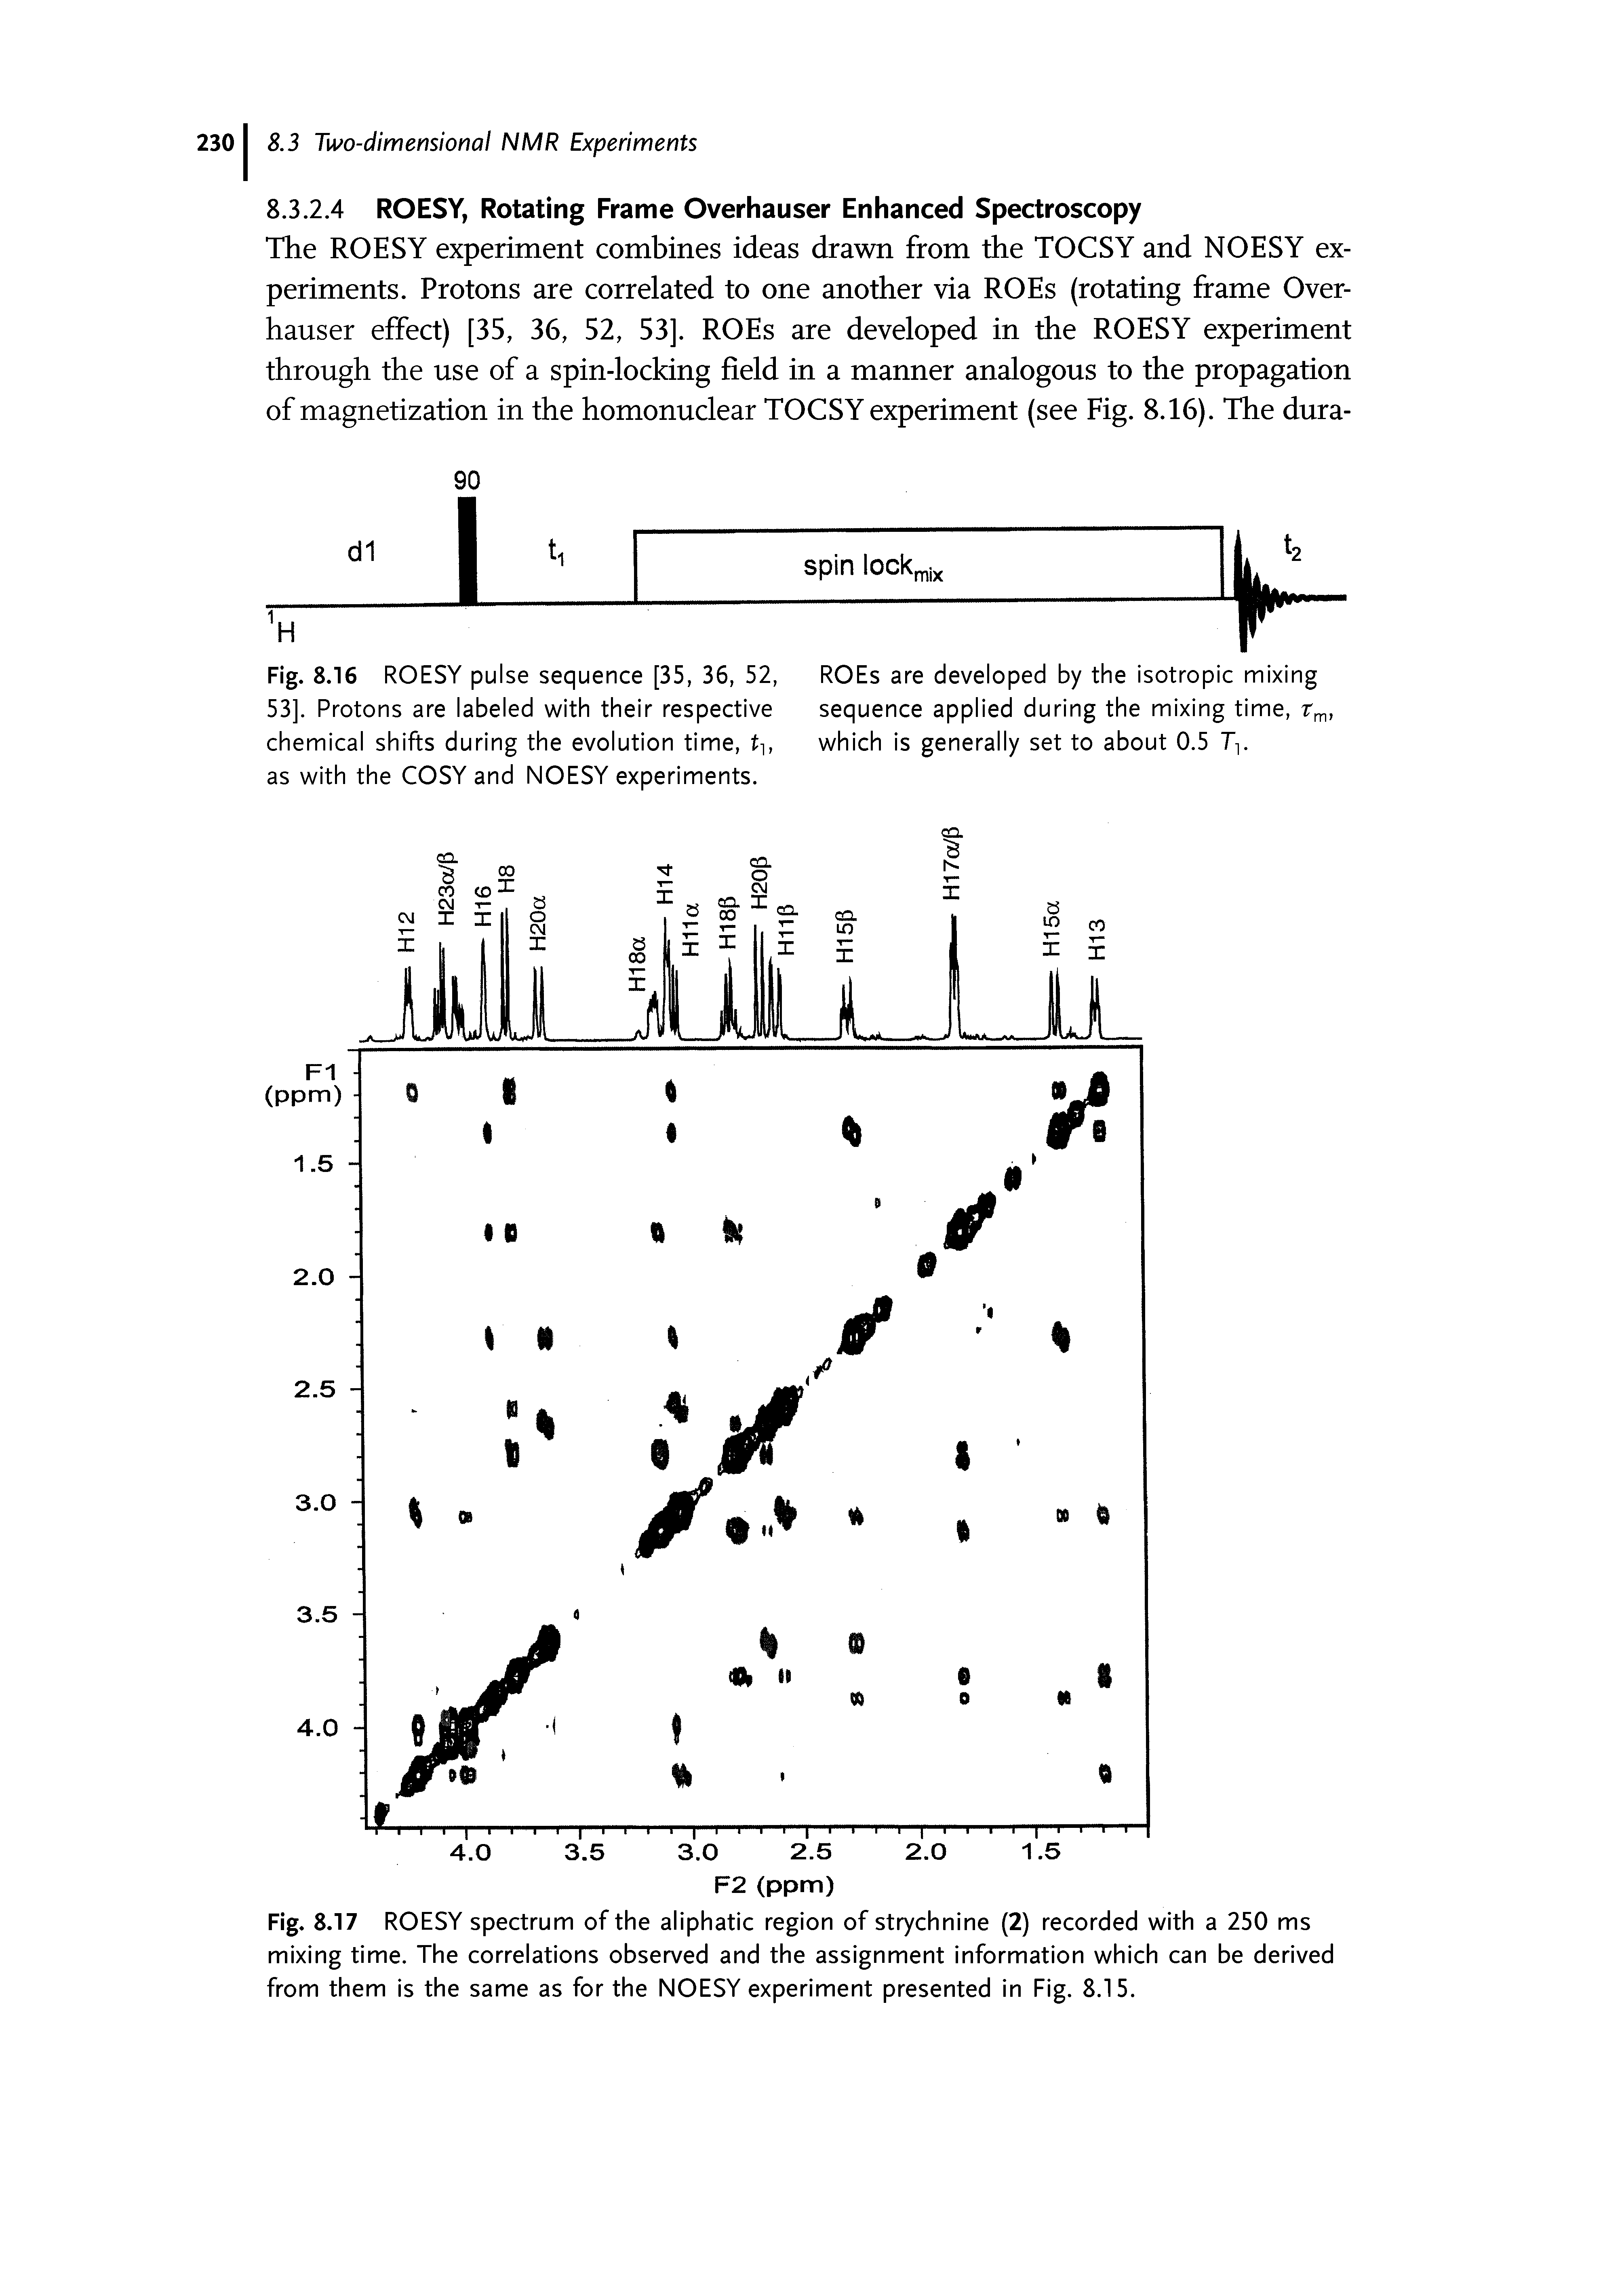 Fig. 8.16 ROESY pulse sequence [35, 36, 52, 53]. Protons are labeled with their respective chemical shifts during the evolution time, ti, as with the COSY and NOESY experiments.